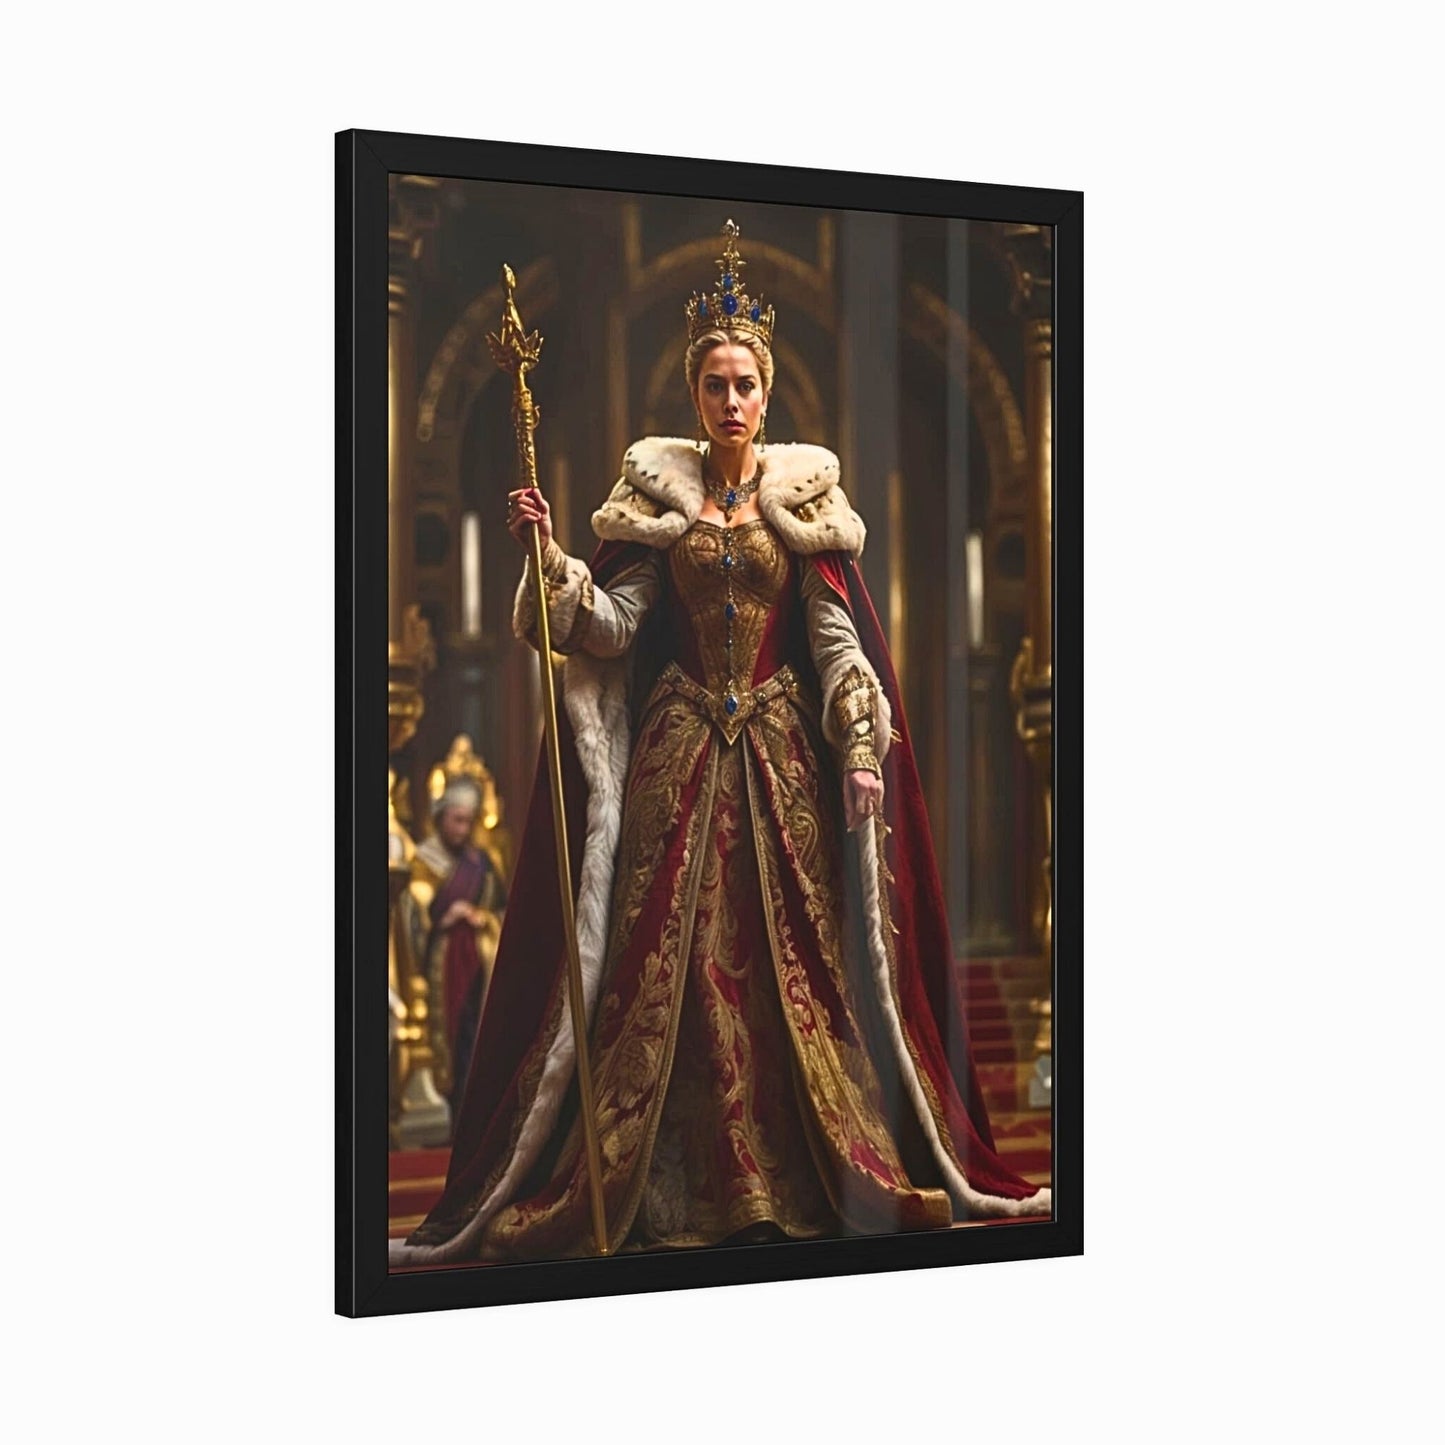 Elevate her to royalty with a bespoke Renaissance portrait tailored from her photo. This custom masterpiece is more than a gift—it's a tribute to her grace and strength, ideal for birthdays or any occasion celebrating her regal spirit. Perfect for those who cherish artistry and seek a meaningful, personalized gesture.